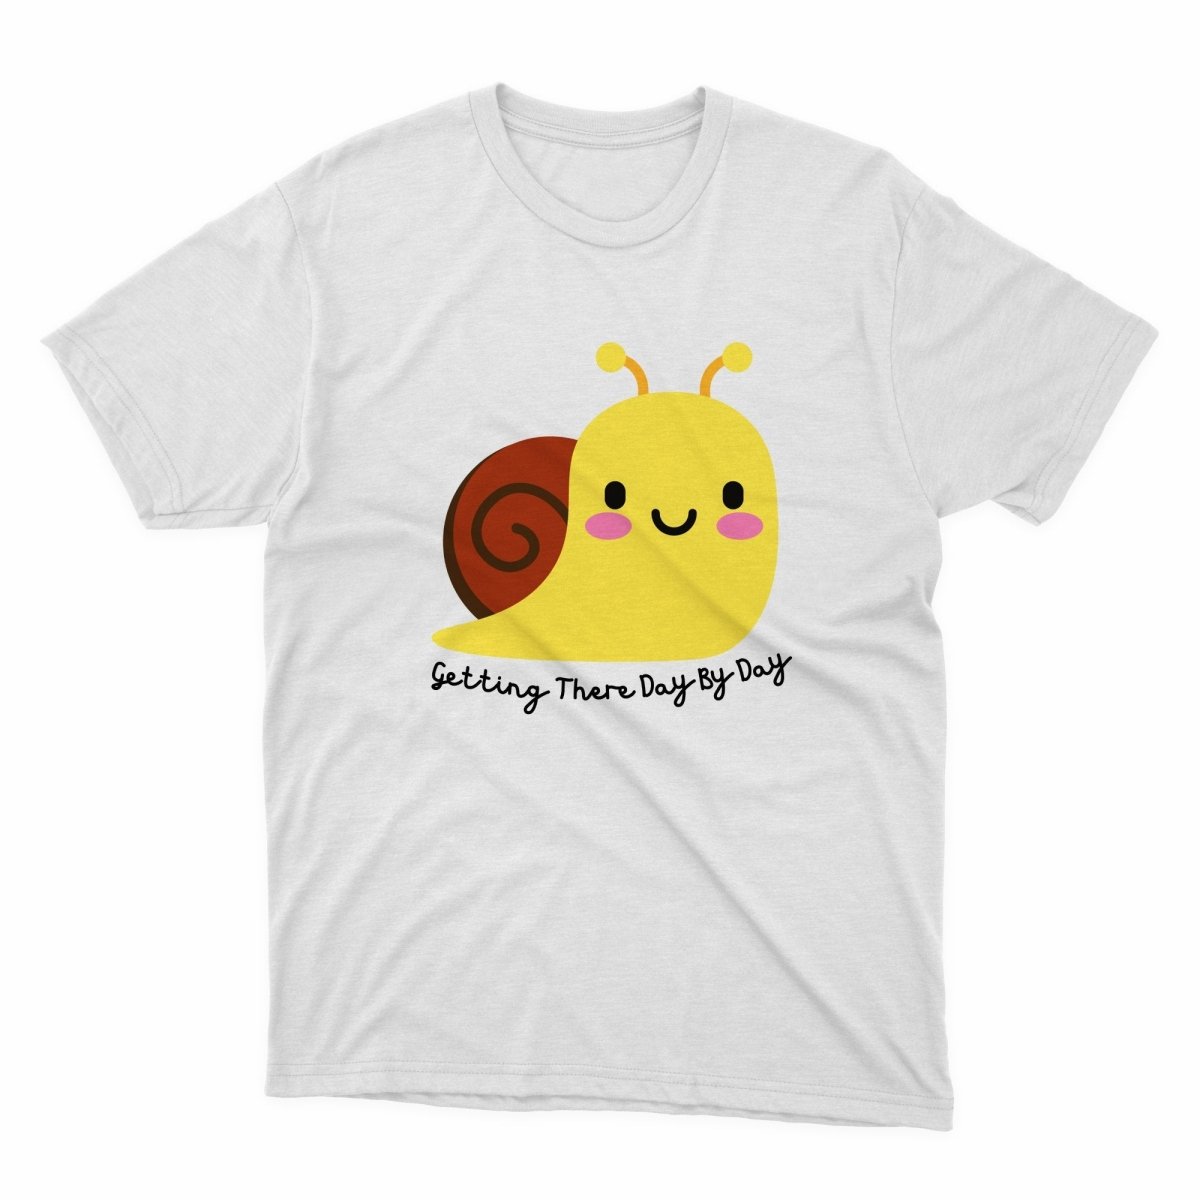 Getting There Day By Day Snail Shirt - stickerbullGetting There Day By Day Snail ShirtShirtsPrintifystickerbull16414246687866027544WhiteSa white t - shirt with a yellow snail on it